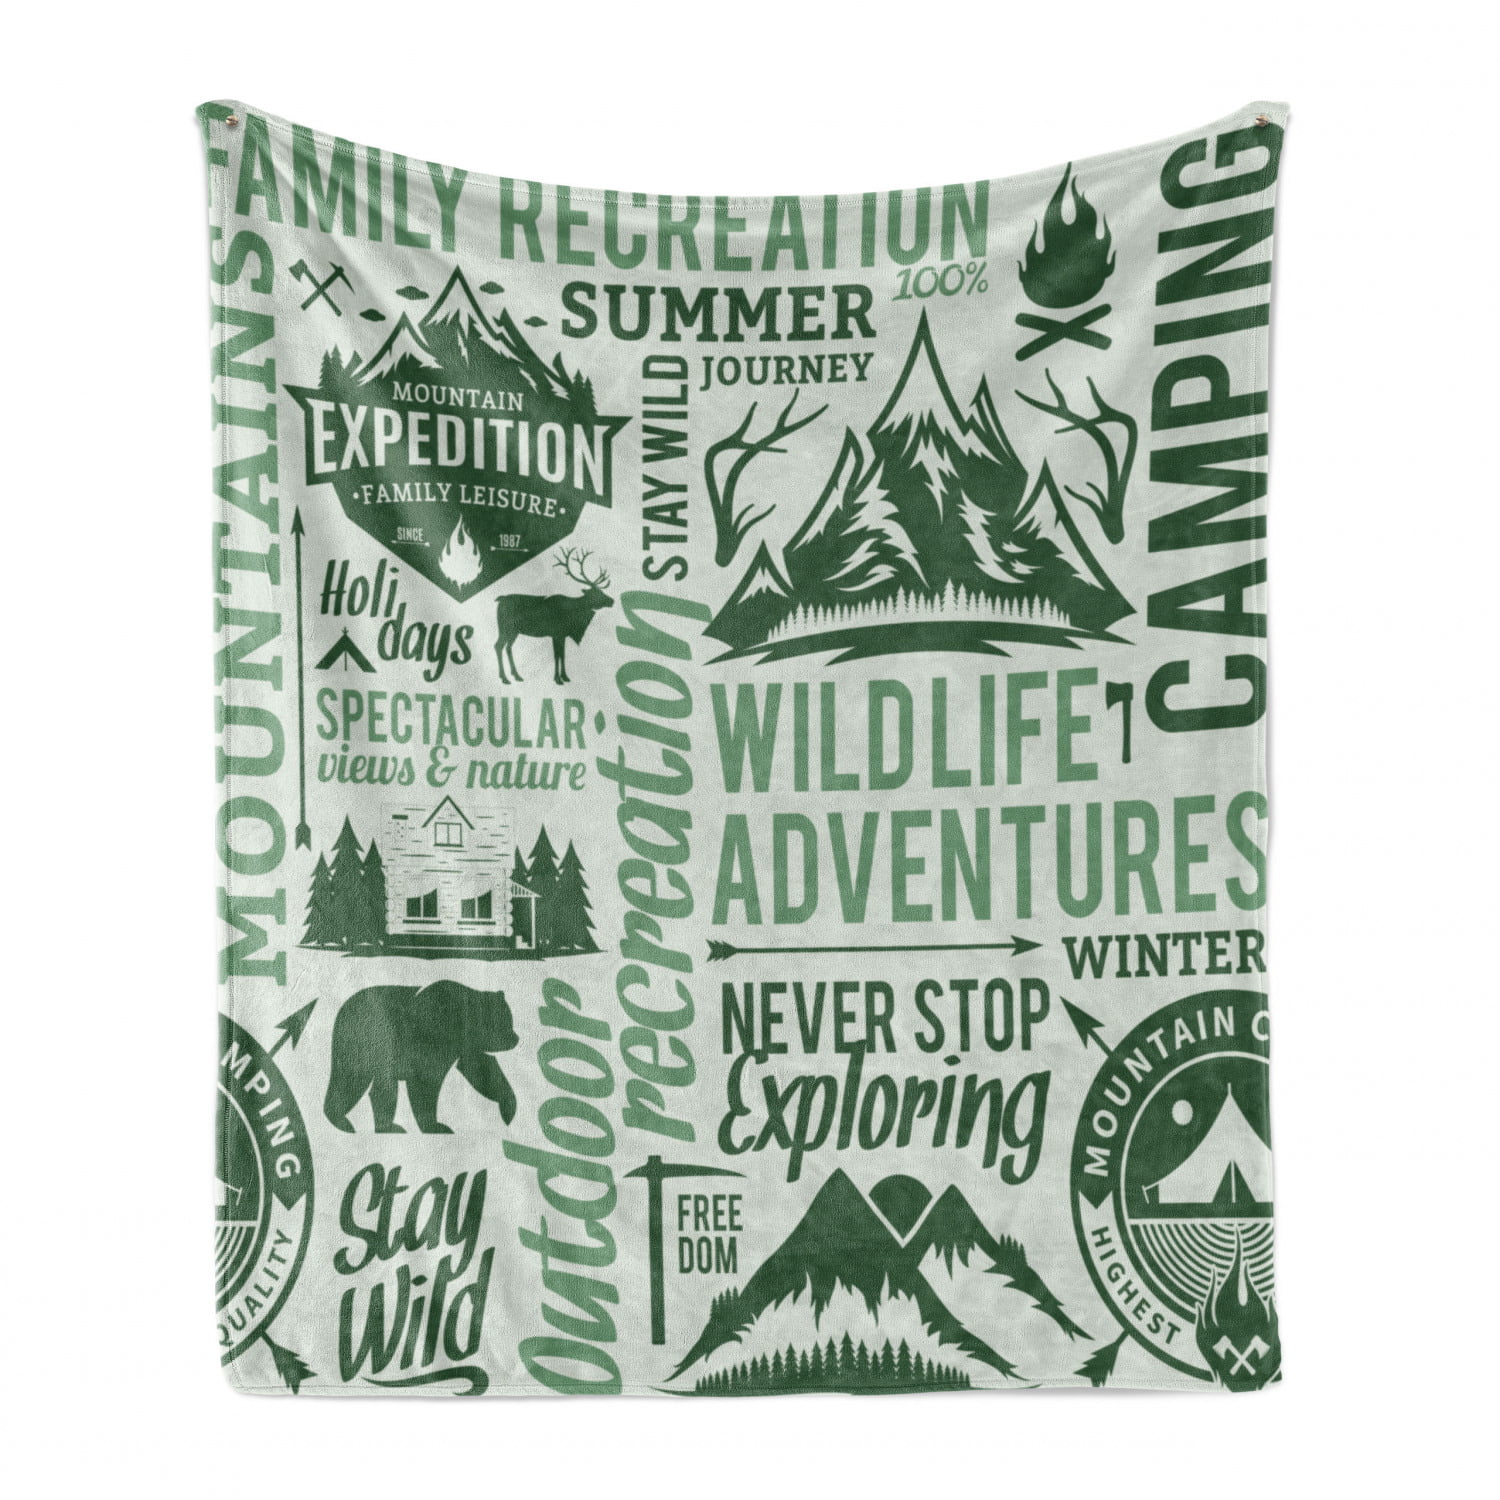 Outdoors Recreation Wildlife Adventures Stay Wild Freedom Lettering Ambesonne Camping Throw Blanket Flannel Fleece Accent Piece Soft Couch Cover for Adults 60 x 80 Pale Green Dark Green